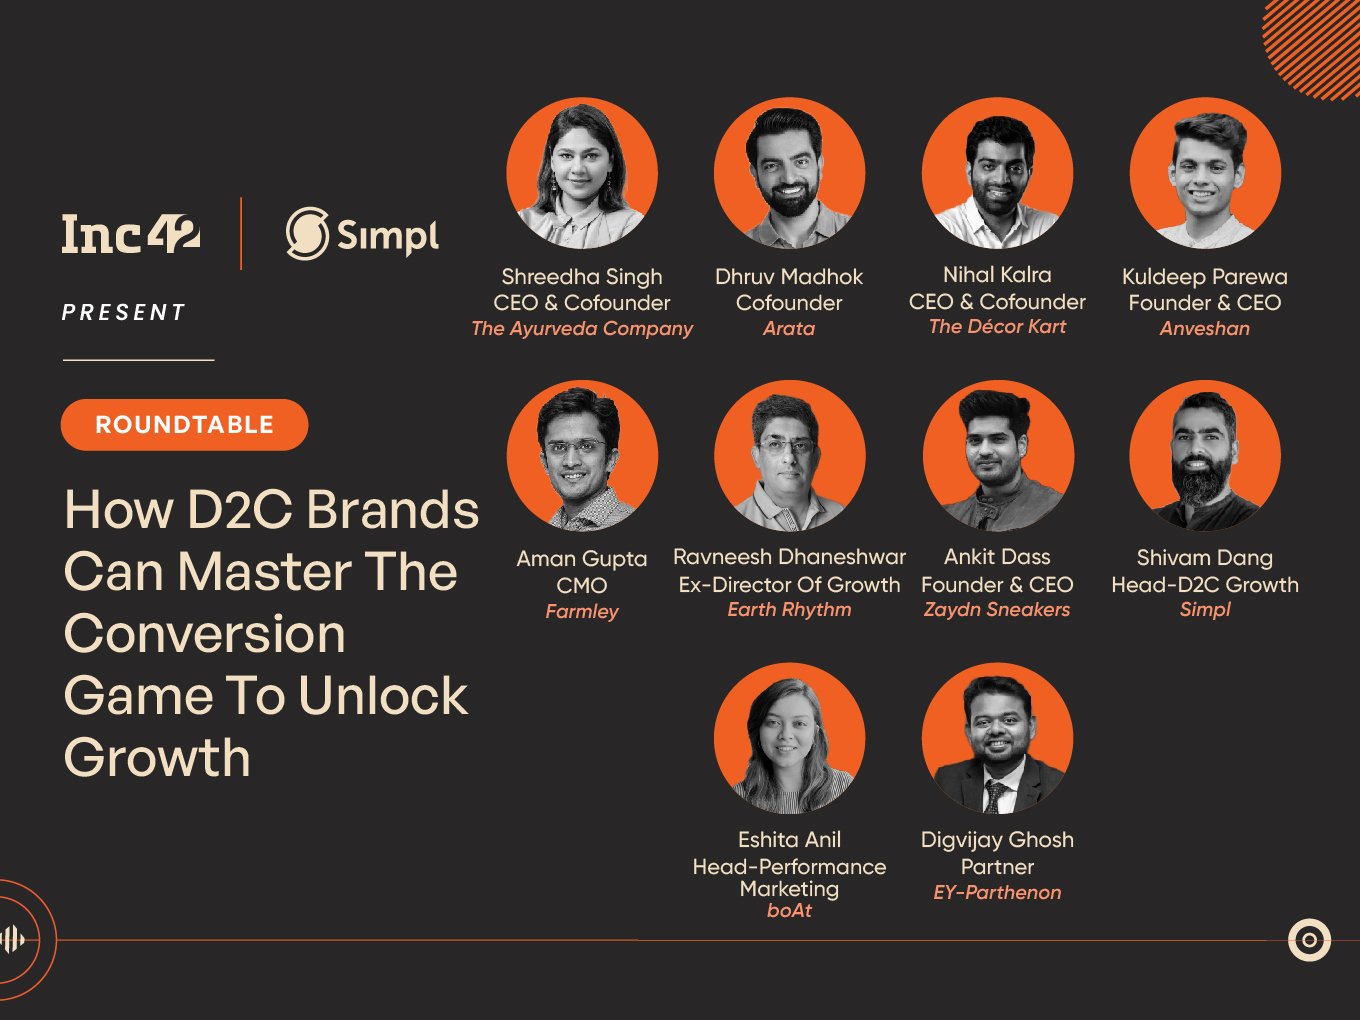 How D2C Brands Can Master The Conversion Game To Unlock Growth